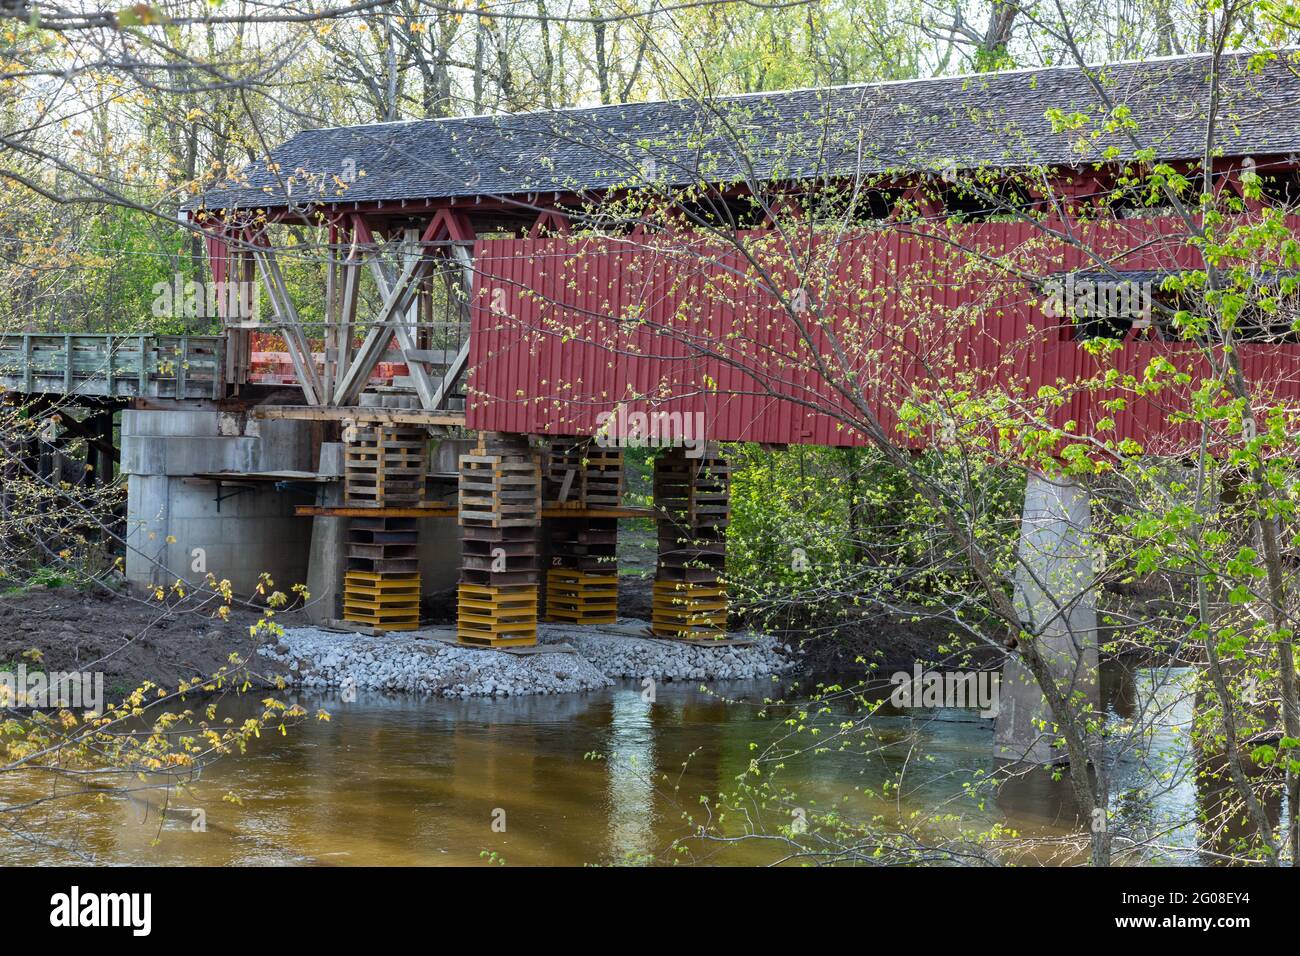 The 1873 Spencerville Covered Bridge, closed for rehabilitation, spans the St. Joseph River at Spencerville, Indiana, USA. Stock Photo